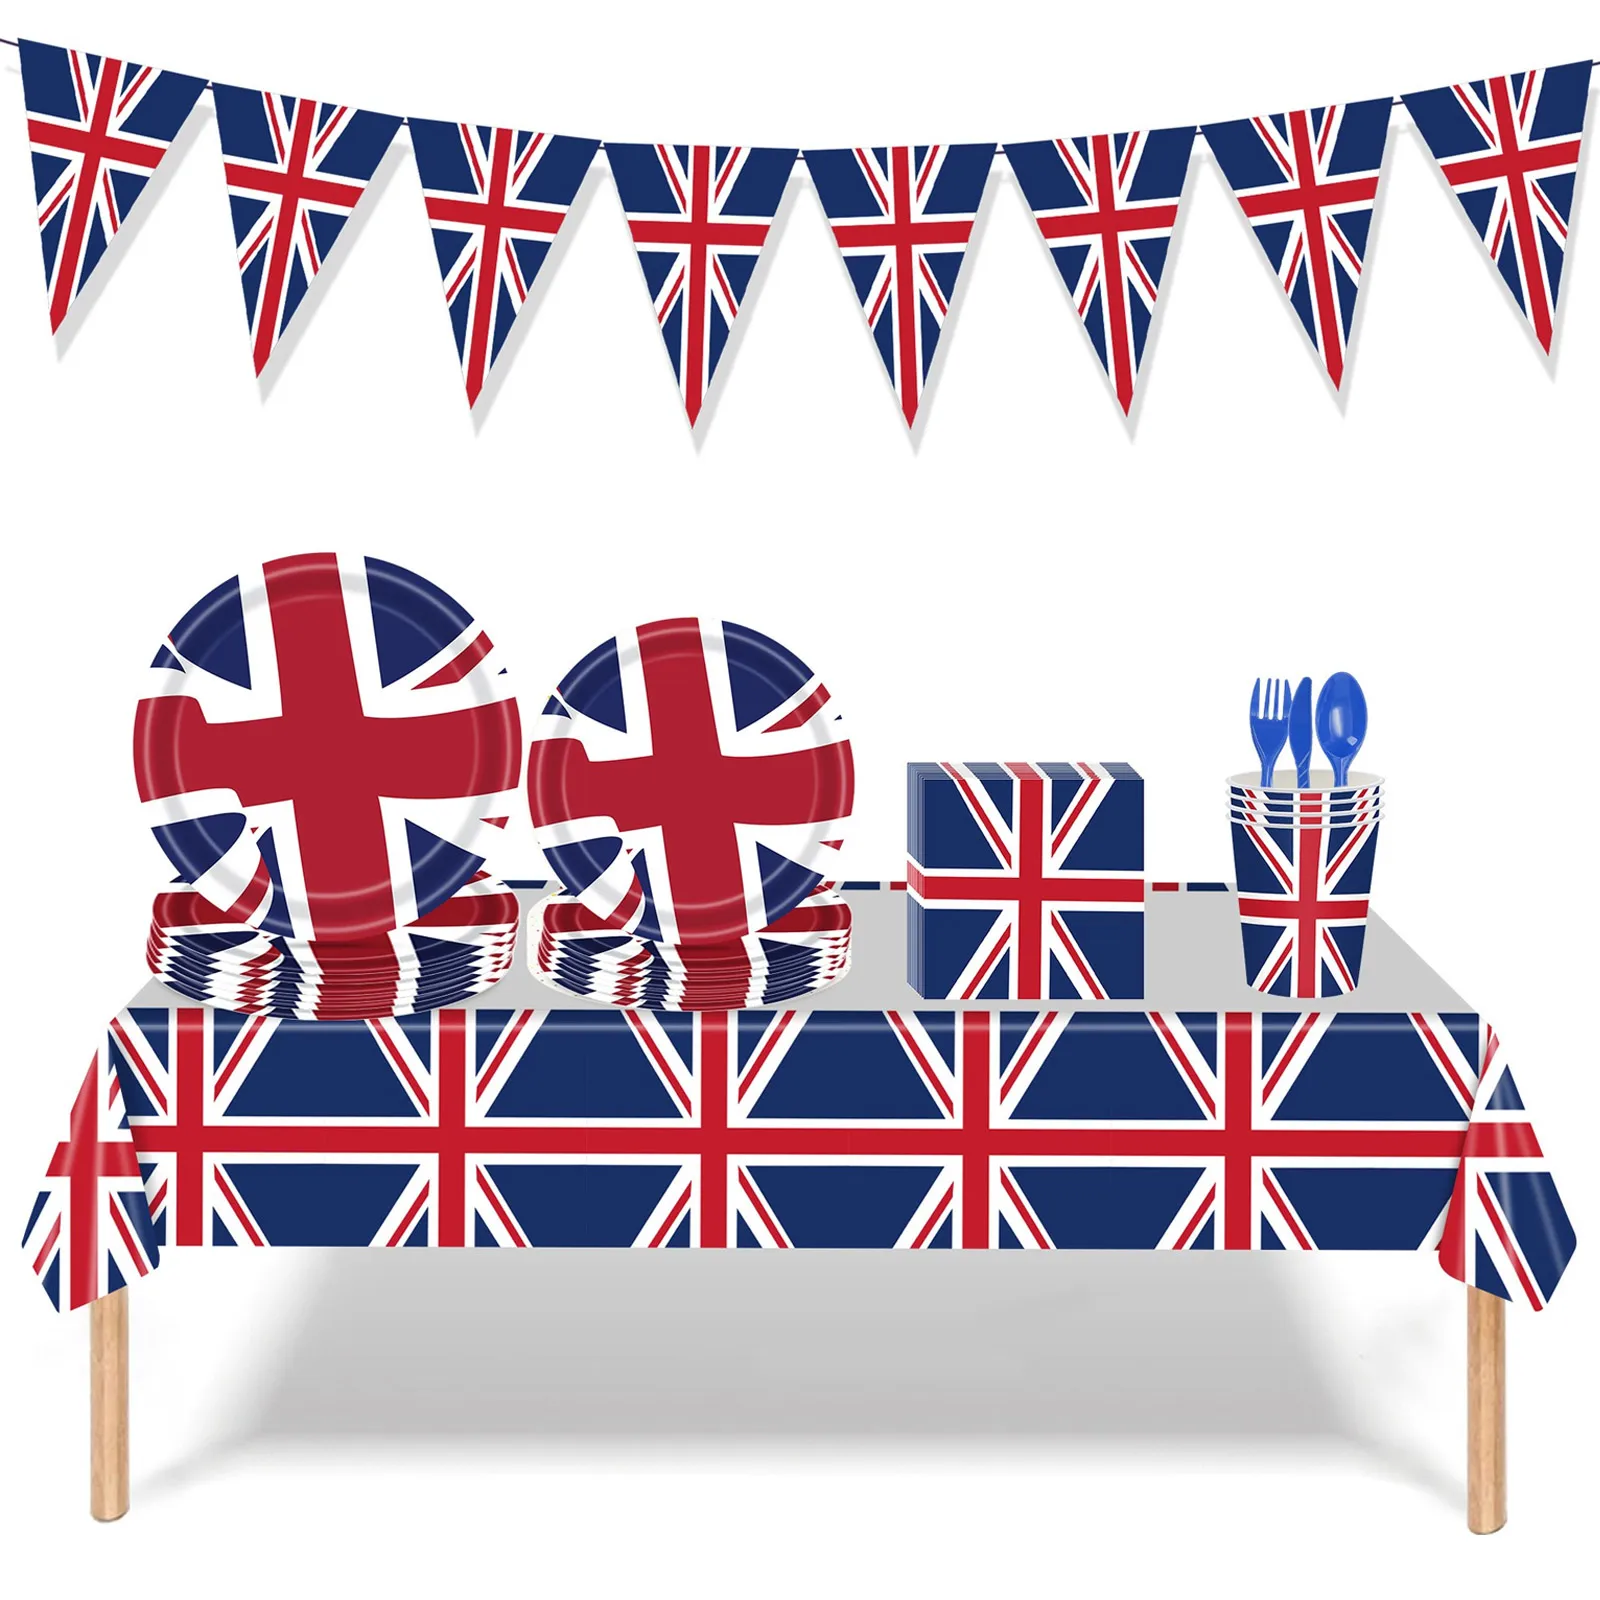 

114 Pcs Union Jack Tableware and Tablecloth Set, British Flag Napkins, Paper Cups, Paper Plates, Bunting Flags and Table Cloth